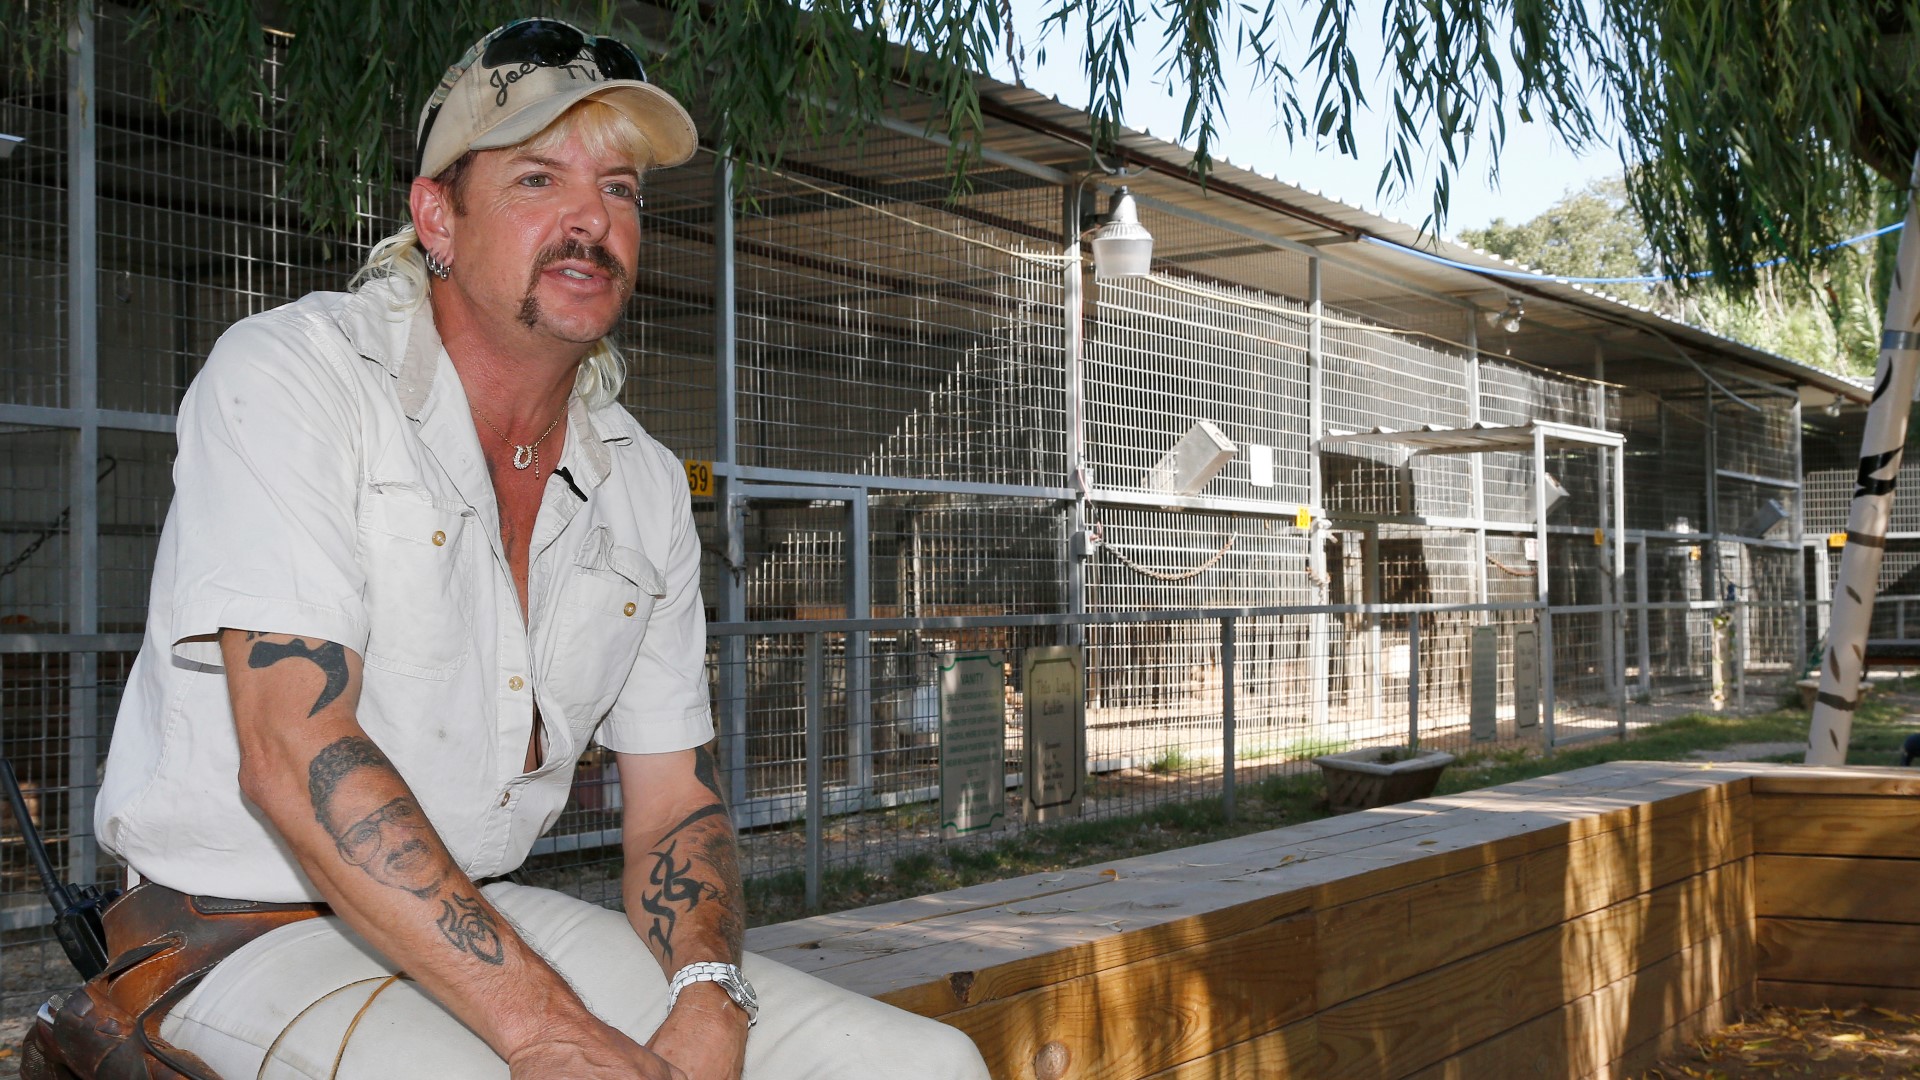 In July, a federal appeals court ruled that Joe Exotic should get a shorter prison sentence for his role in a murder-for-hire plot and violating fed wildlife laws.